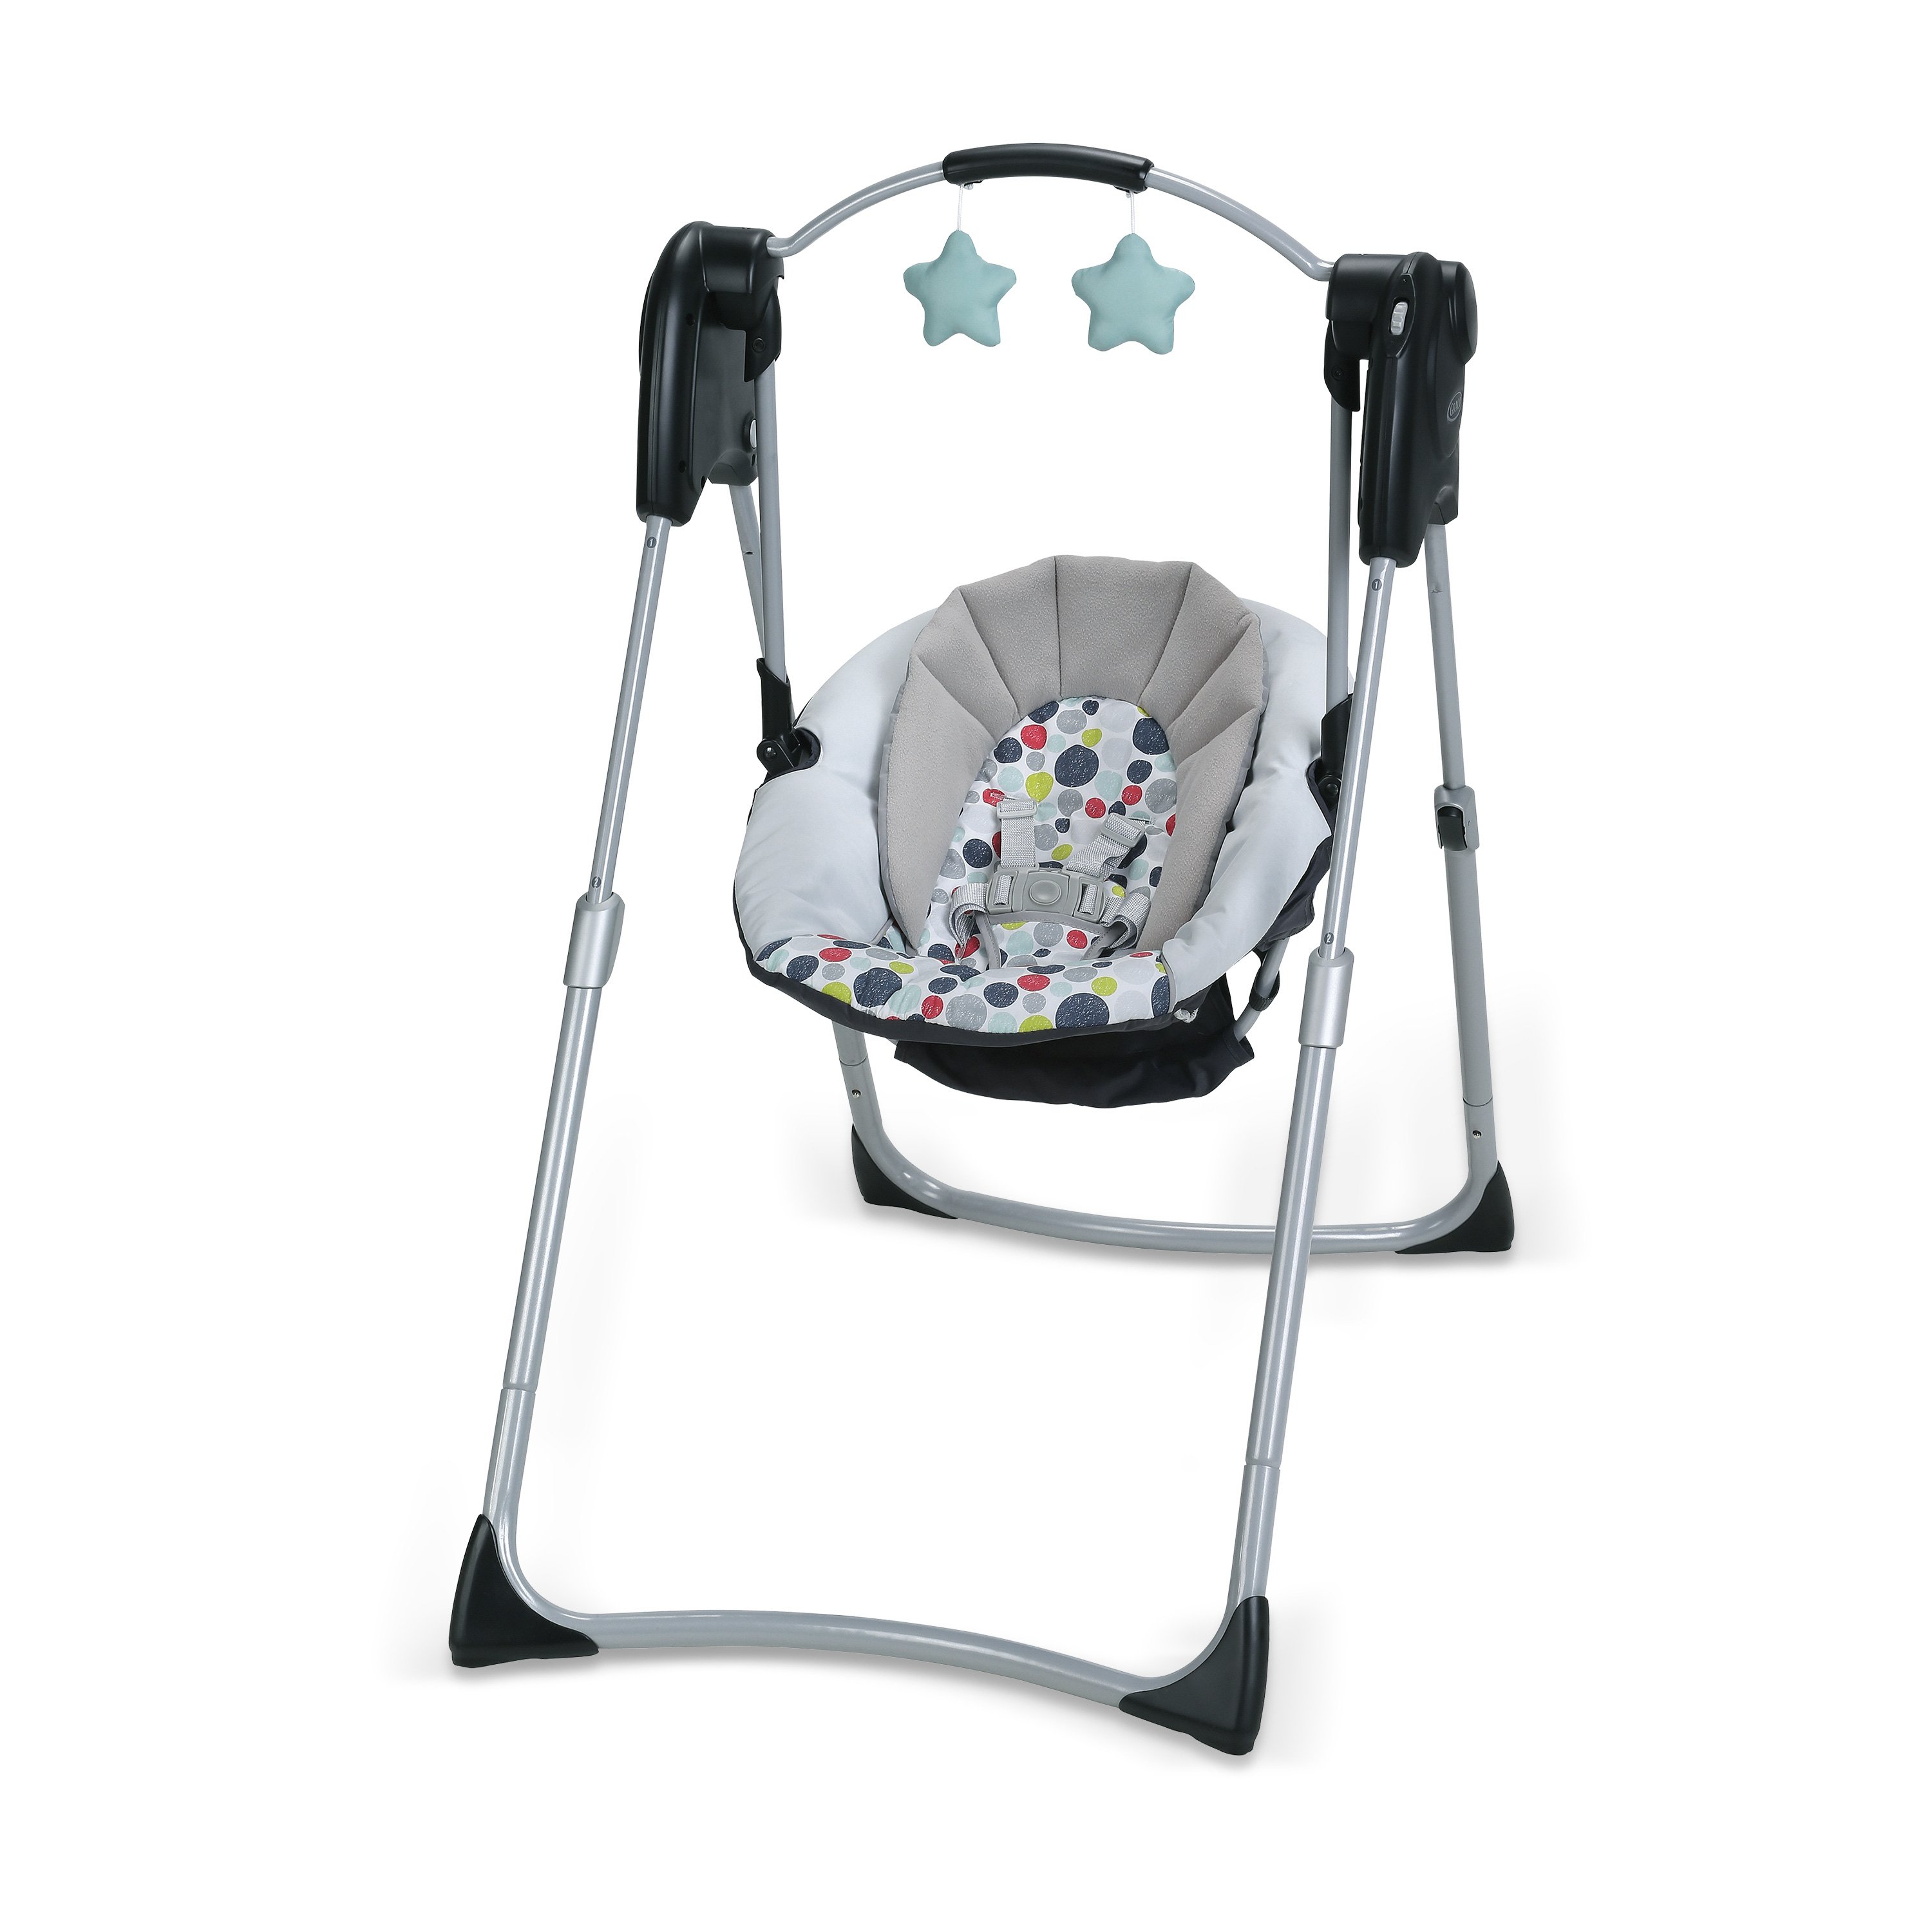 graco infant swing weight limit